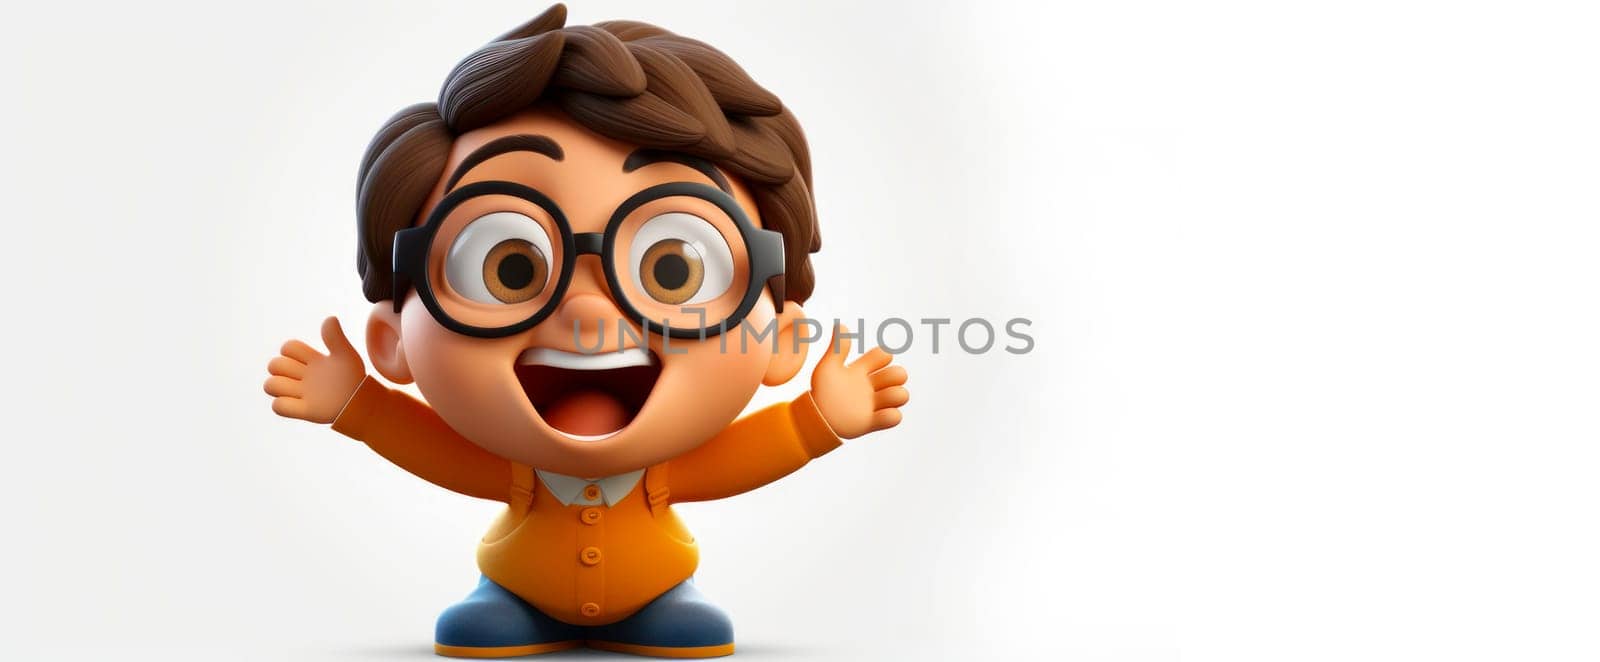 Patisson with a cheerful face 3D on a white background. Cartoon characters, three-dimensional character, healthy lifestyle, proper nutrition, diet, fresh vegetables and fruits, vegetarianism, veganism, food, breakfast, fun, laughter, banner